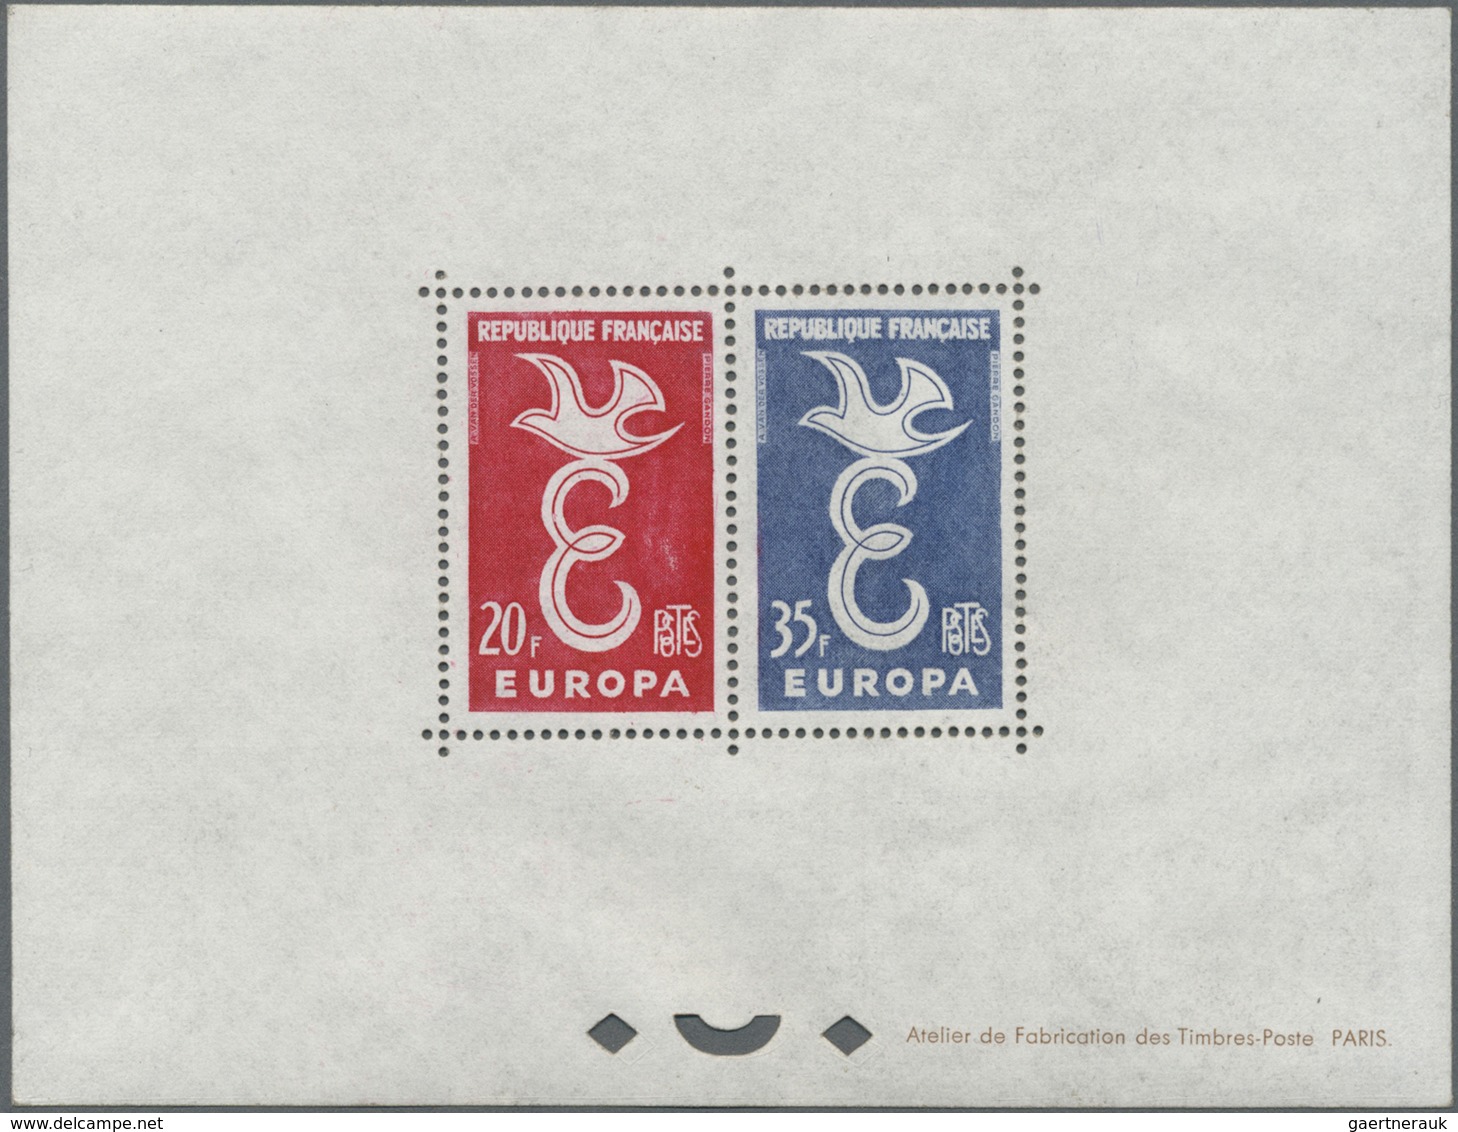 ** Thematik: Europa / Europe: 1958, France. EUROPA Issue (2 Values) As A Collective DeLuxe Sheet. Mint, - Idées Européennes